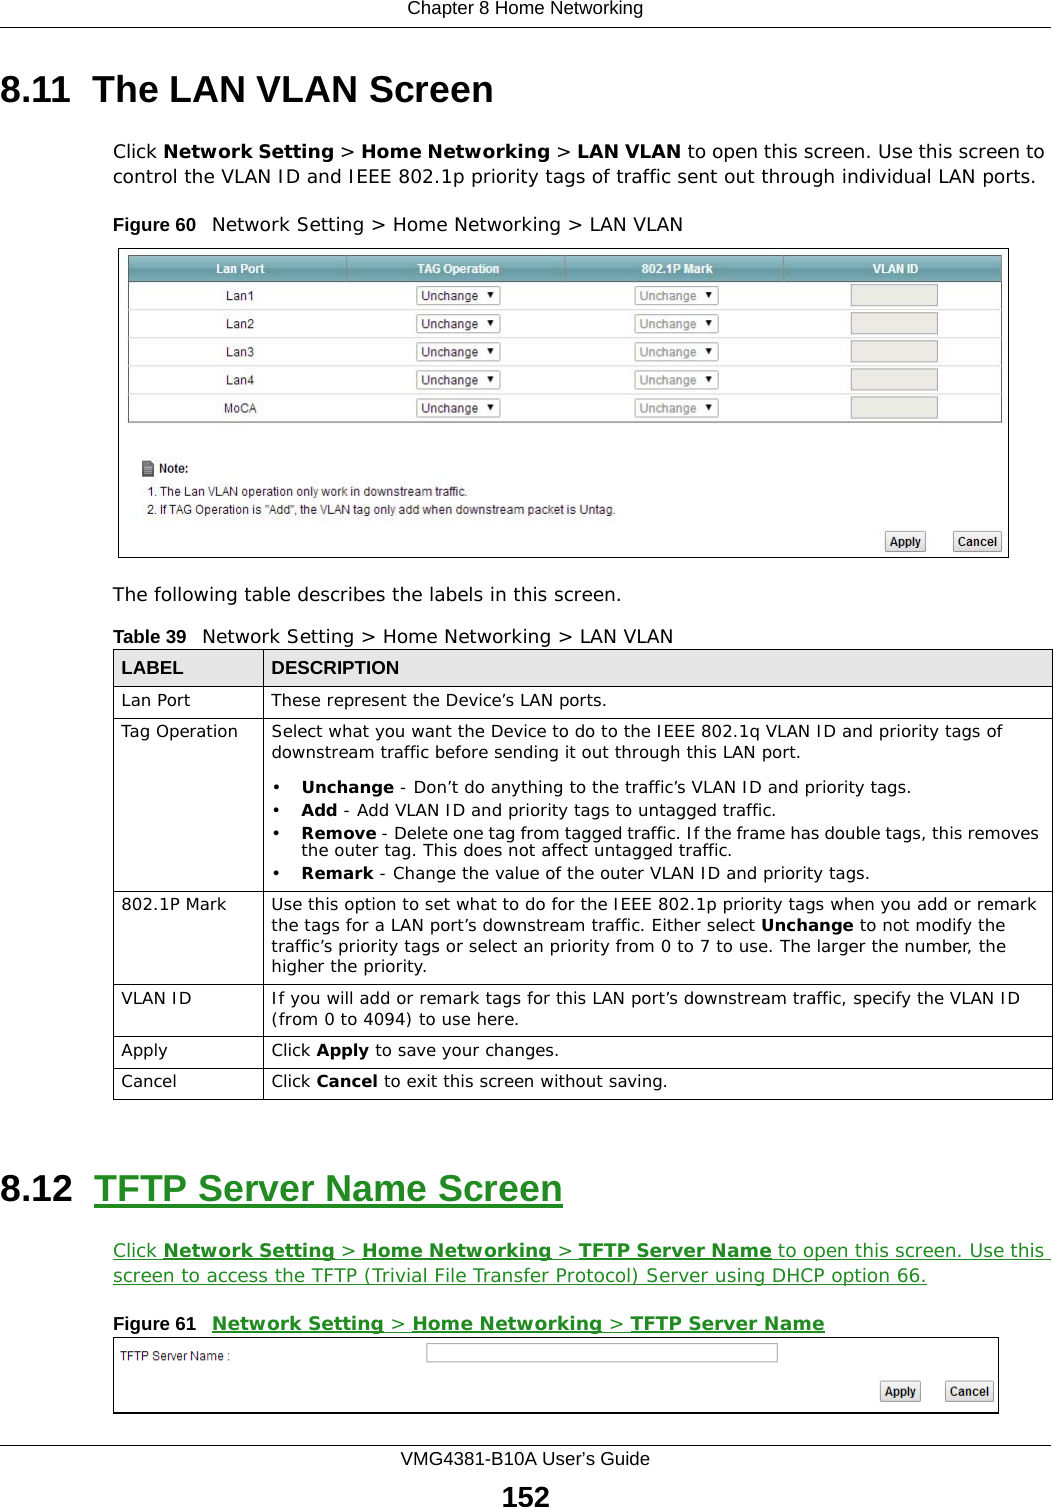 Chapter 8 Home NetworkingVMG4381-B10A User’s Guide1528.11  The LAN VLAN ScreenClick Network Setting &gt; Home Networking &gt; LAN VLAN to open this screen. Use this screen to control the VLAN ID and IEEE 802.1p priority tags of traffic sent out through individual LAN ports. Figure 60   Network Setting &gt; Home Networking &gt; LAN VLANThe following table describes the labels in this screen.8.12  TFTP Server Name ScreenClick Network Setting &gt; Home Networking &gt; TFTP Server Name to open this screen. Use this screen to access the TFTP (Trivial File Transfer Protocol) Server using DHCP option 66.Figure 61   Network Setting &gt; Home Networking &gt; TFTP Server NameTable 39   Network Setting &gt; Home Networking &gt; LAN VLANLABEL DESCRIPTIONLan Port These represent the Device’s LAN ports.Tag Operation Select what you want the Device to do to the IEEE 802.1q VLAN ID and priority tags of downstream traffic before sending it out through this LAN port.•Unchange - Don’t do anything to the traffic’s VLAN ID and priority tags.•Add - Add VLAN ID and priority tags to untagged traffic.•Remove - Delete one tag from tagged traffic. If the frame has double tags, this removes the outer tag. This does not affect untagged traffic.•Remark - Change the value of the outer VLAN ID and priority tags.802.1P Mark Use this option to set what to do for the IEEE 802.1p priority tags when you add or remark the tags for a LAN port’s downstream traffic. Either select Unchange to not modify the traffic’s priority tags or select an priority from 0 to 7 to use. The larger the number, the higher the priority.VLAN ID If you will add or remark tags for this LAN port’s downstream traffic, specify the VLAN ID (from 0 to 4094) to use here.Apply Click Apply to save your changes.Cancel Click Cancel to exit this screen without saving.